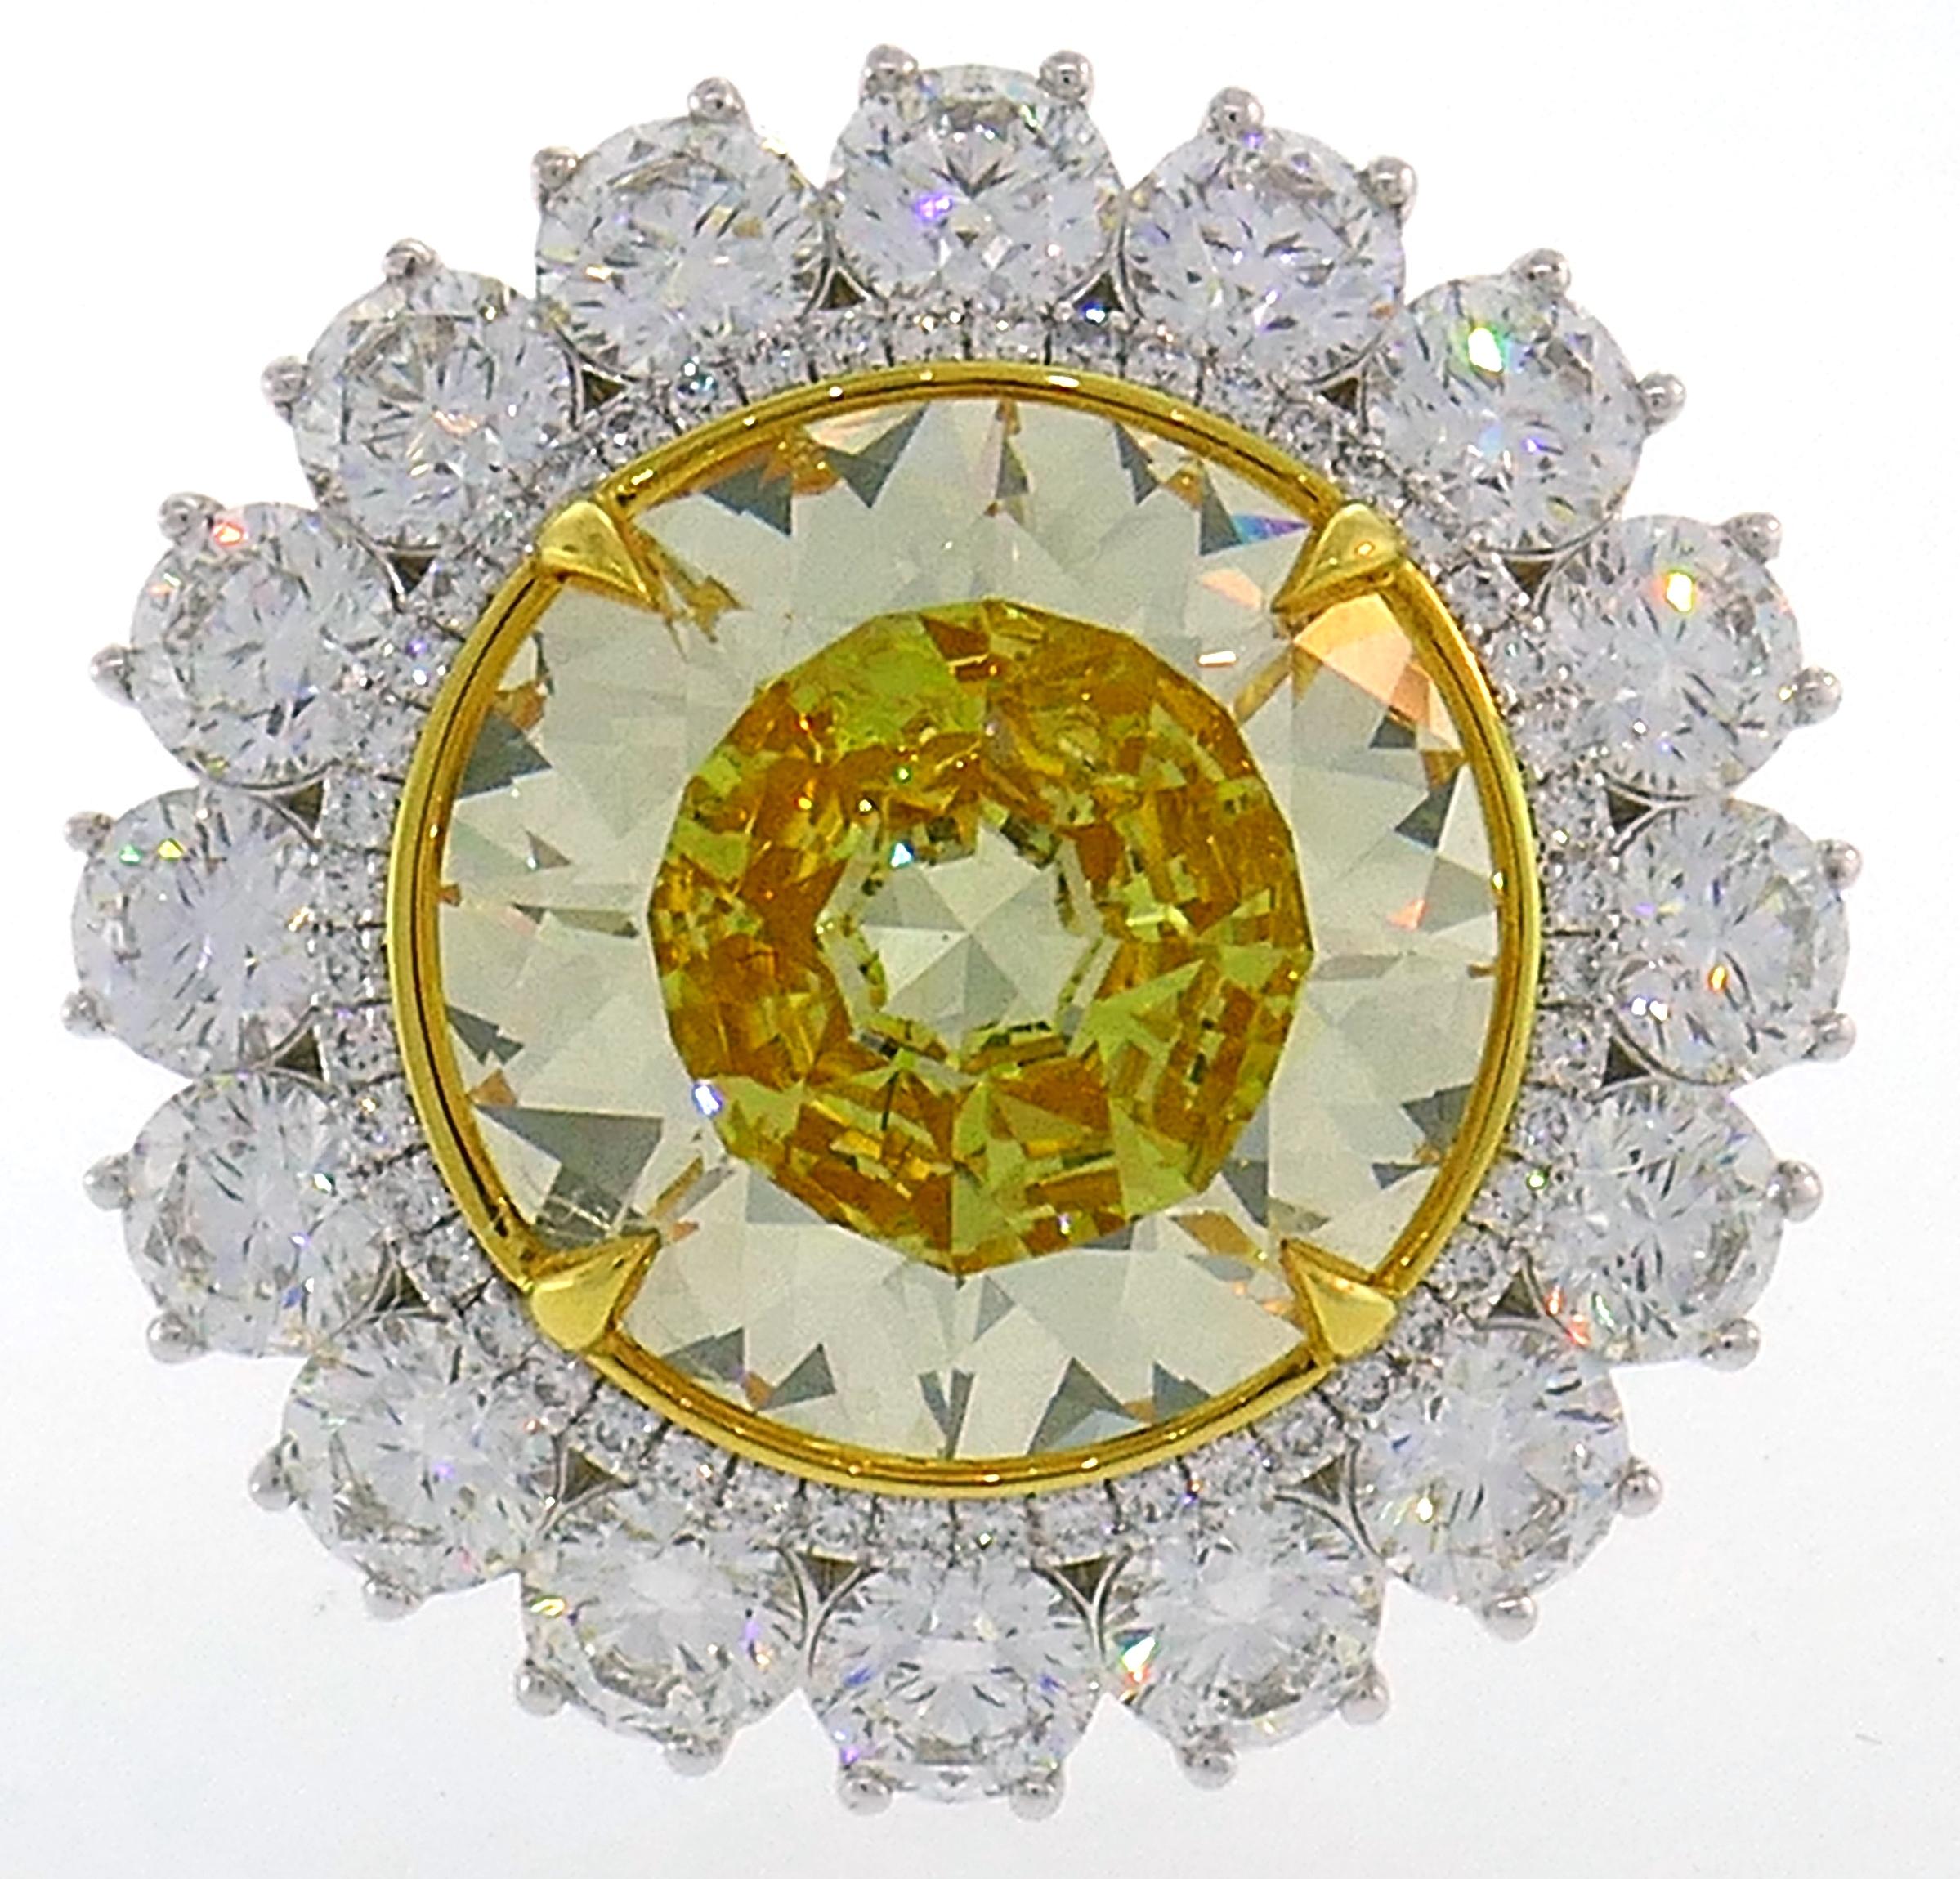 Magnificent fancy yellow diamond ring! Features a 10.04-carat natural fancy intense yellow round modified brilliant cut diamond framed by two rows of round brilliant cut white diamonds. The fancy yellow diamond comes with a GIA Colored Diamond